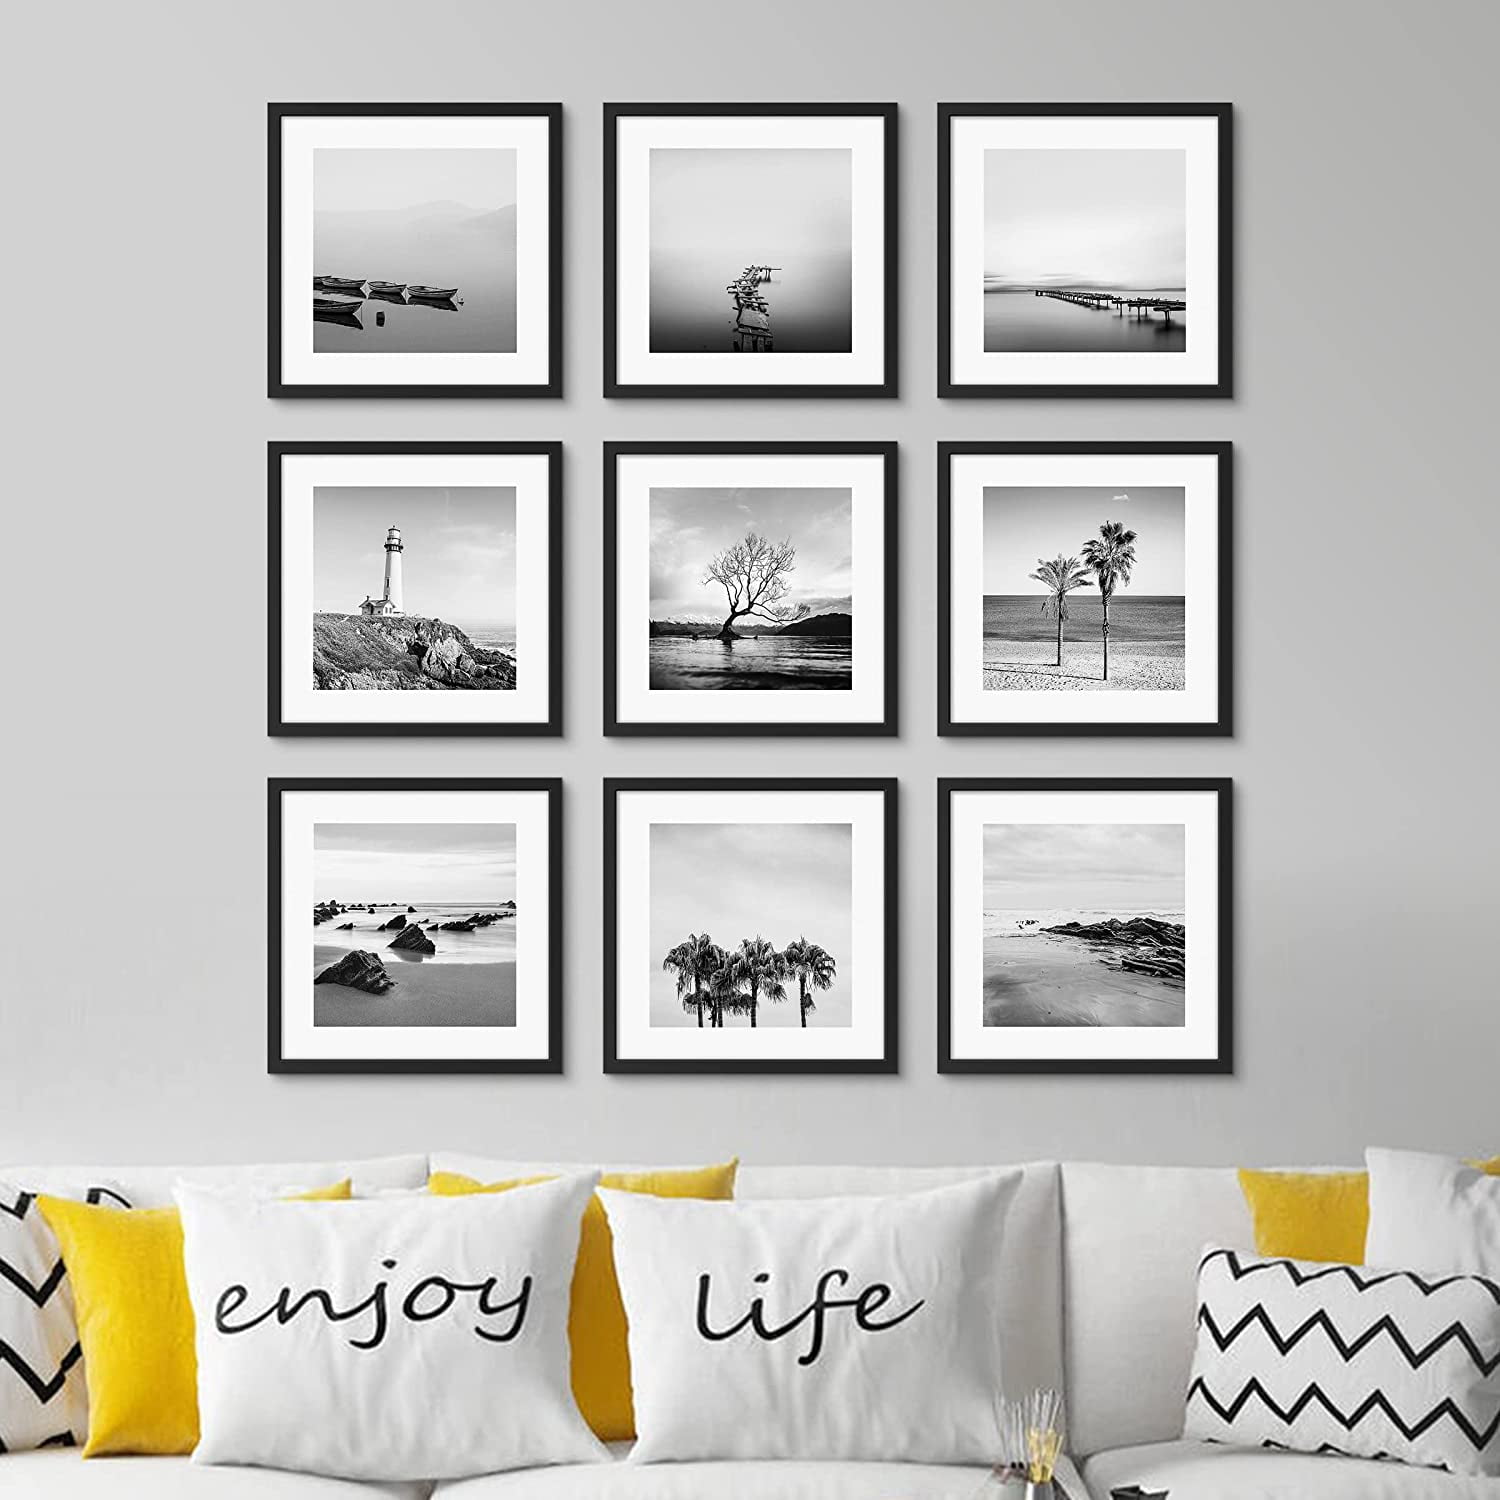 eletecpro 8x8 Picture Frames Set of 9 Classic Gallery Wall Frame